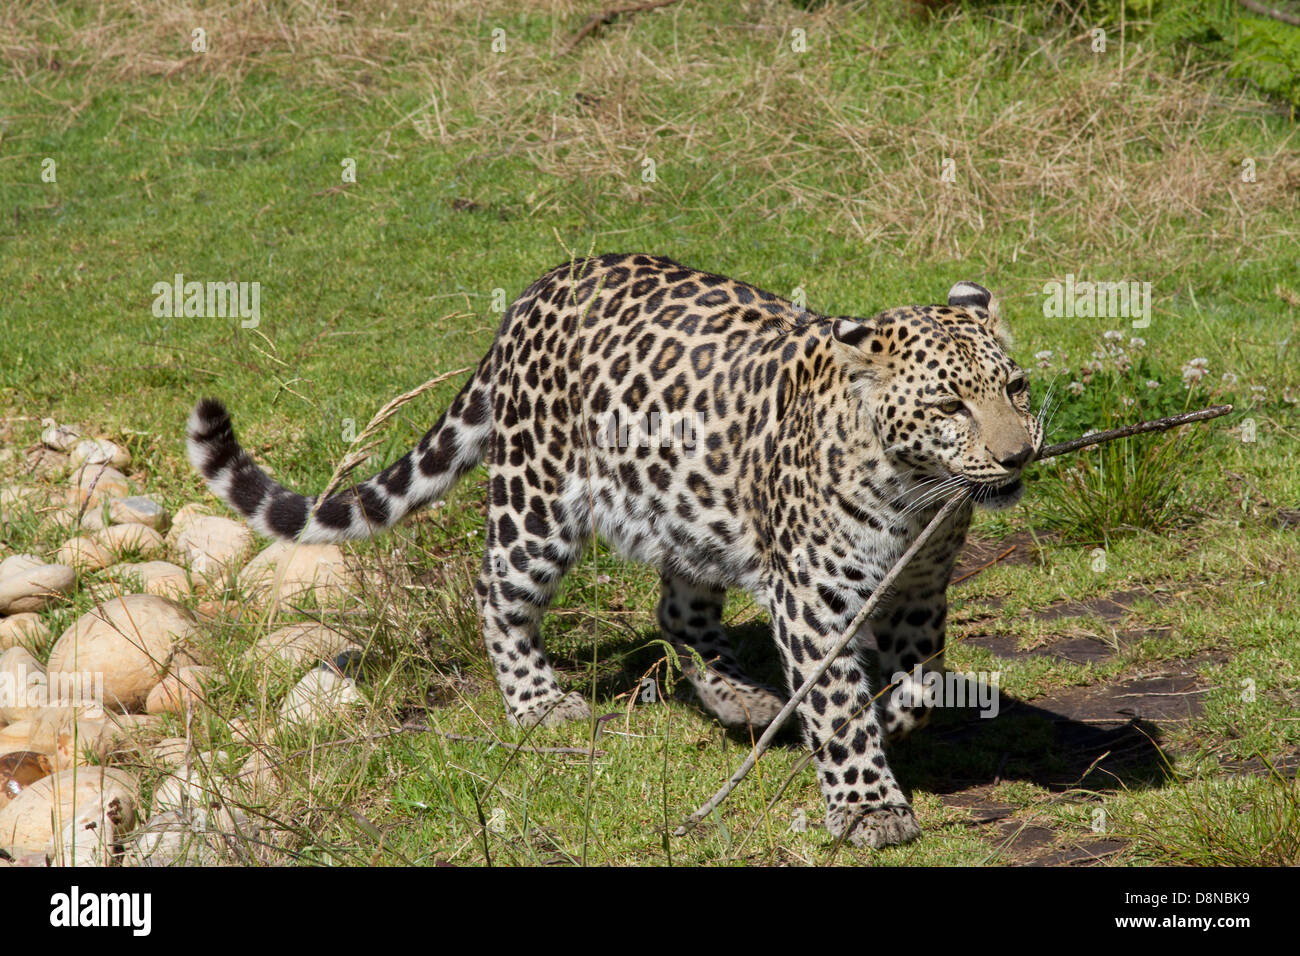 Leopard cub plays with a piece of grass Stock Photo